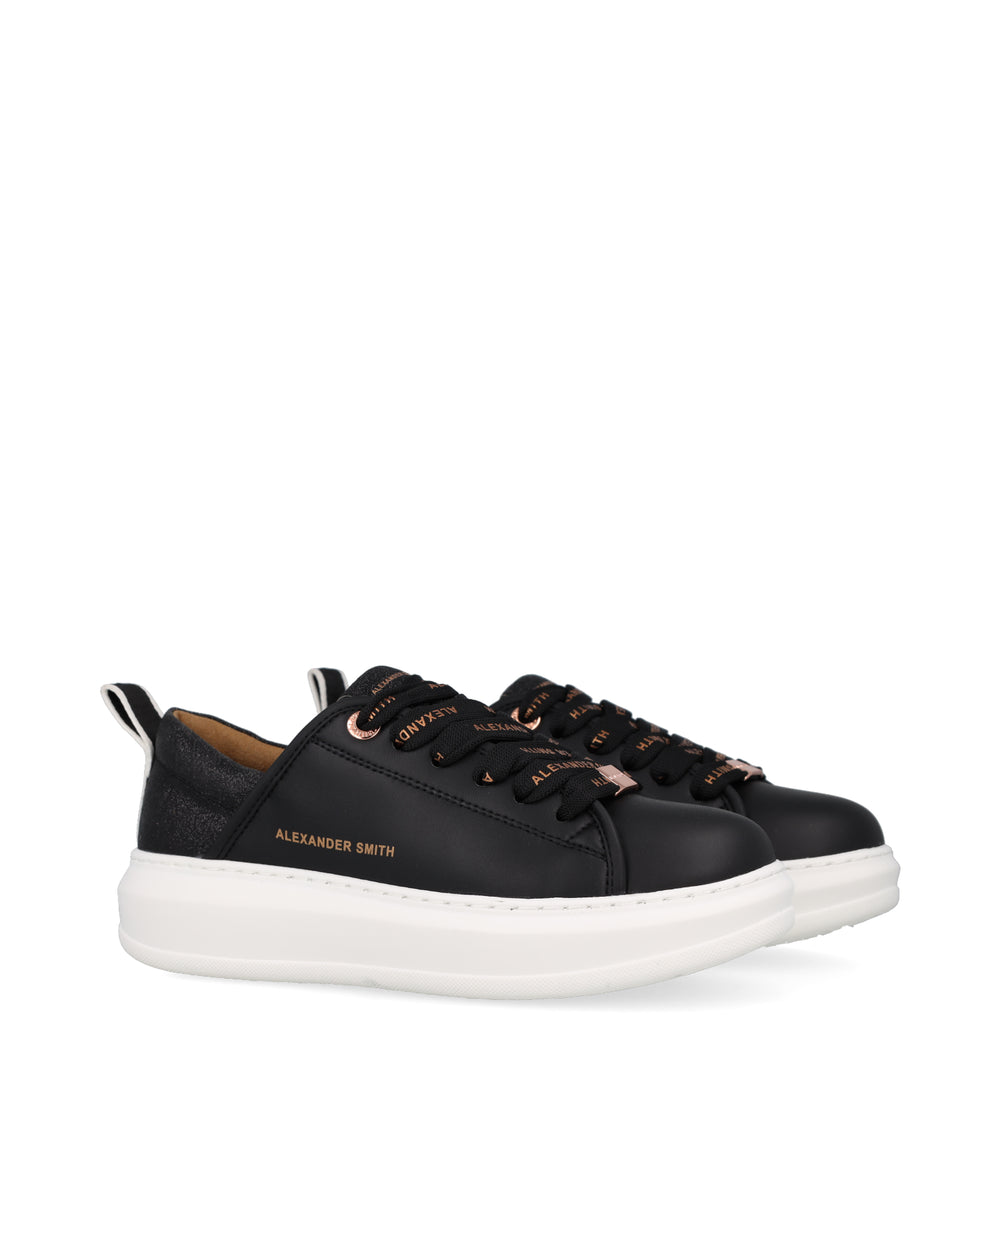 ALEXANDER SMITH | ACBC SNEAKERS | AEAYECD14BLK